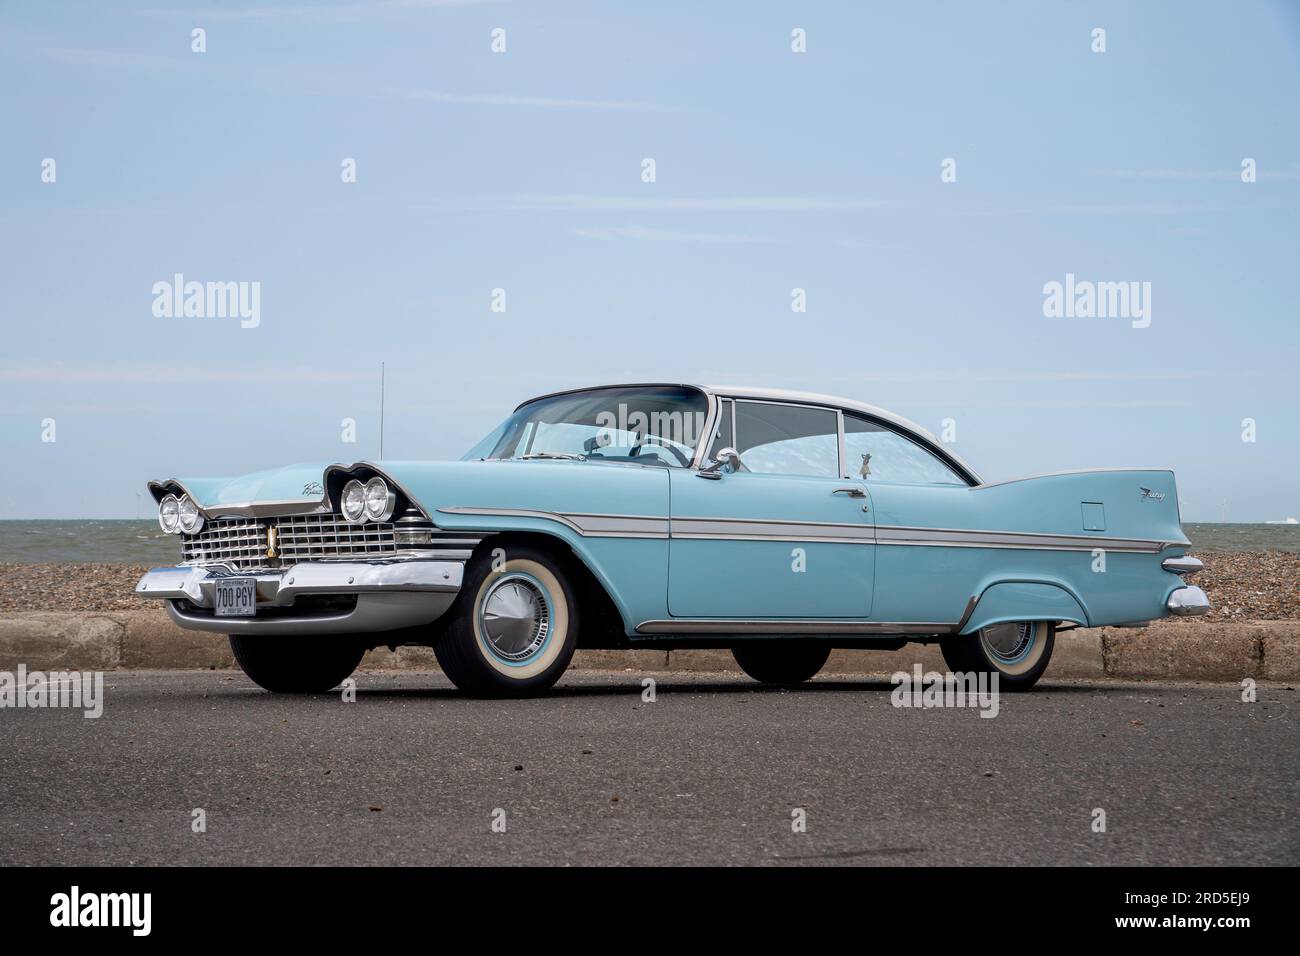 1959 Plymouth Fury full size classic American family car Stock Photo